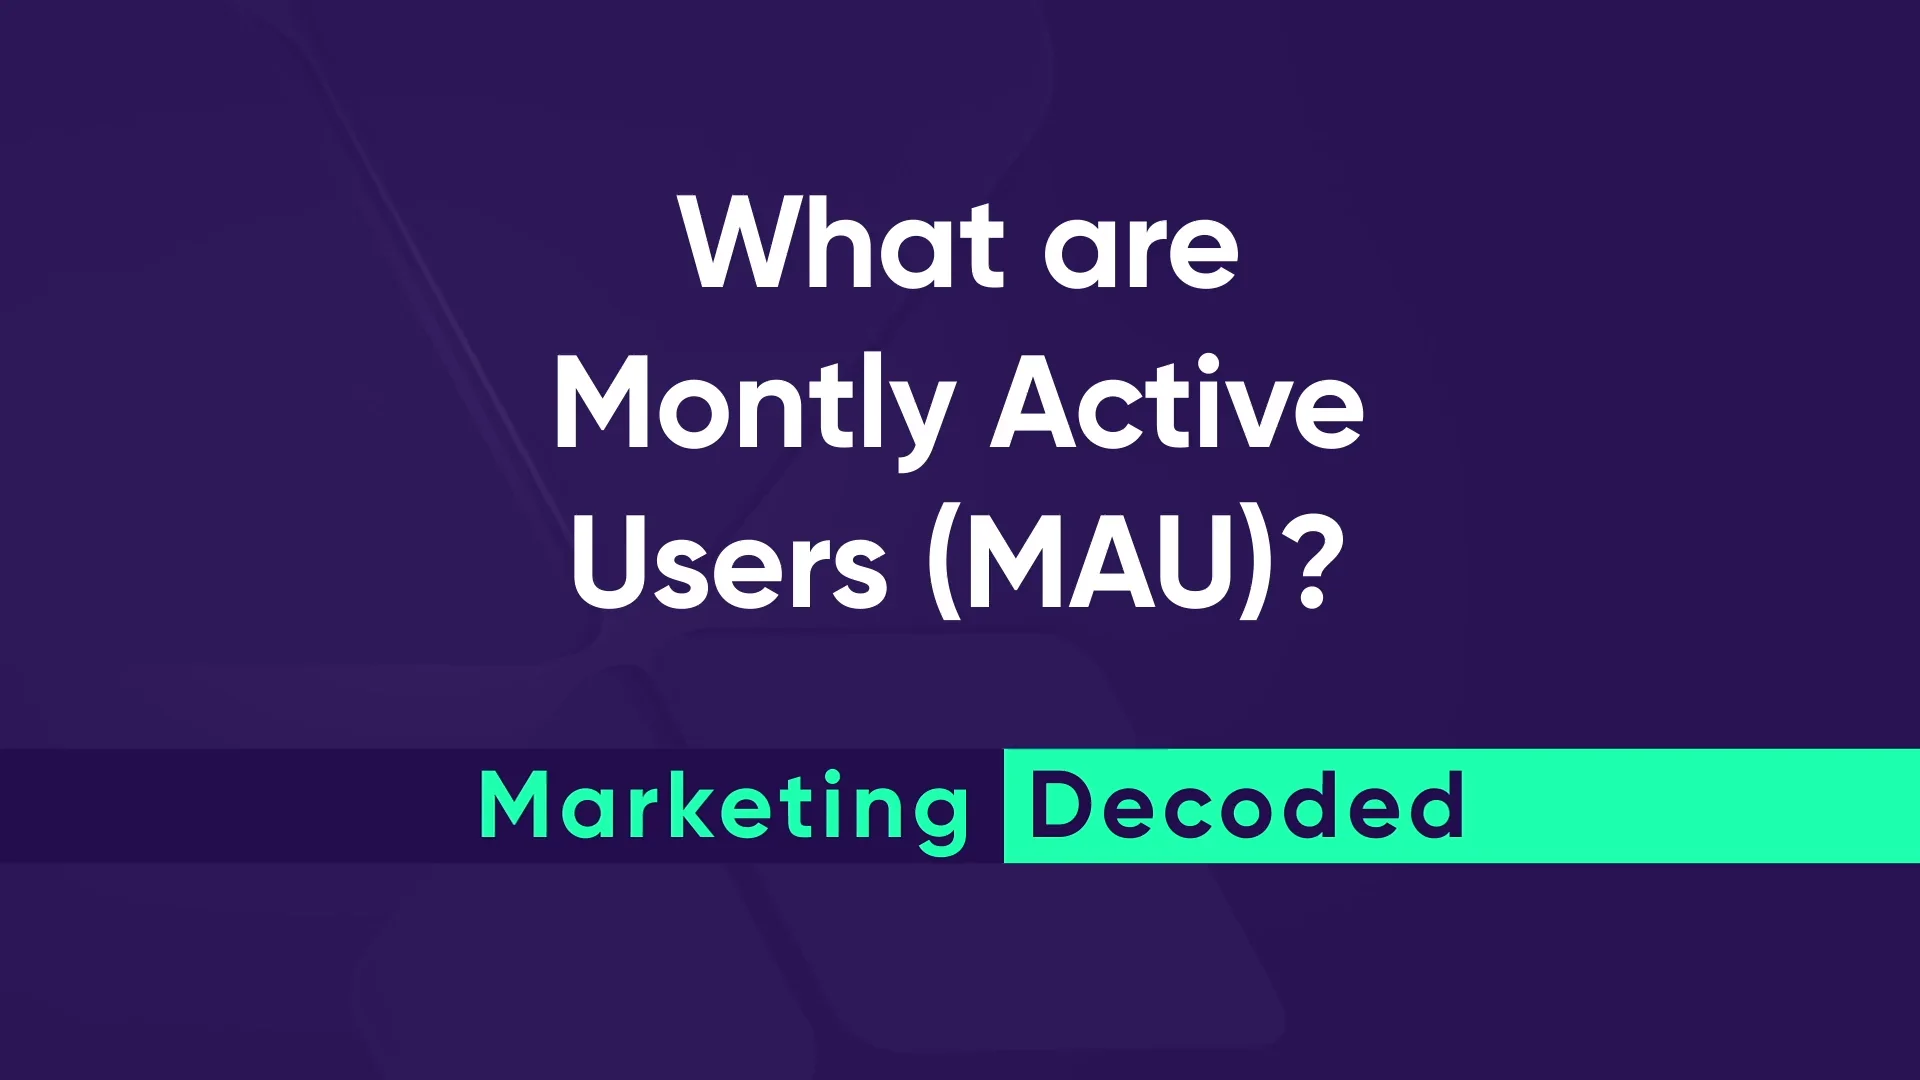 MAU (Monthly Active Users) video